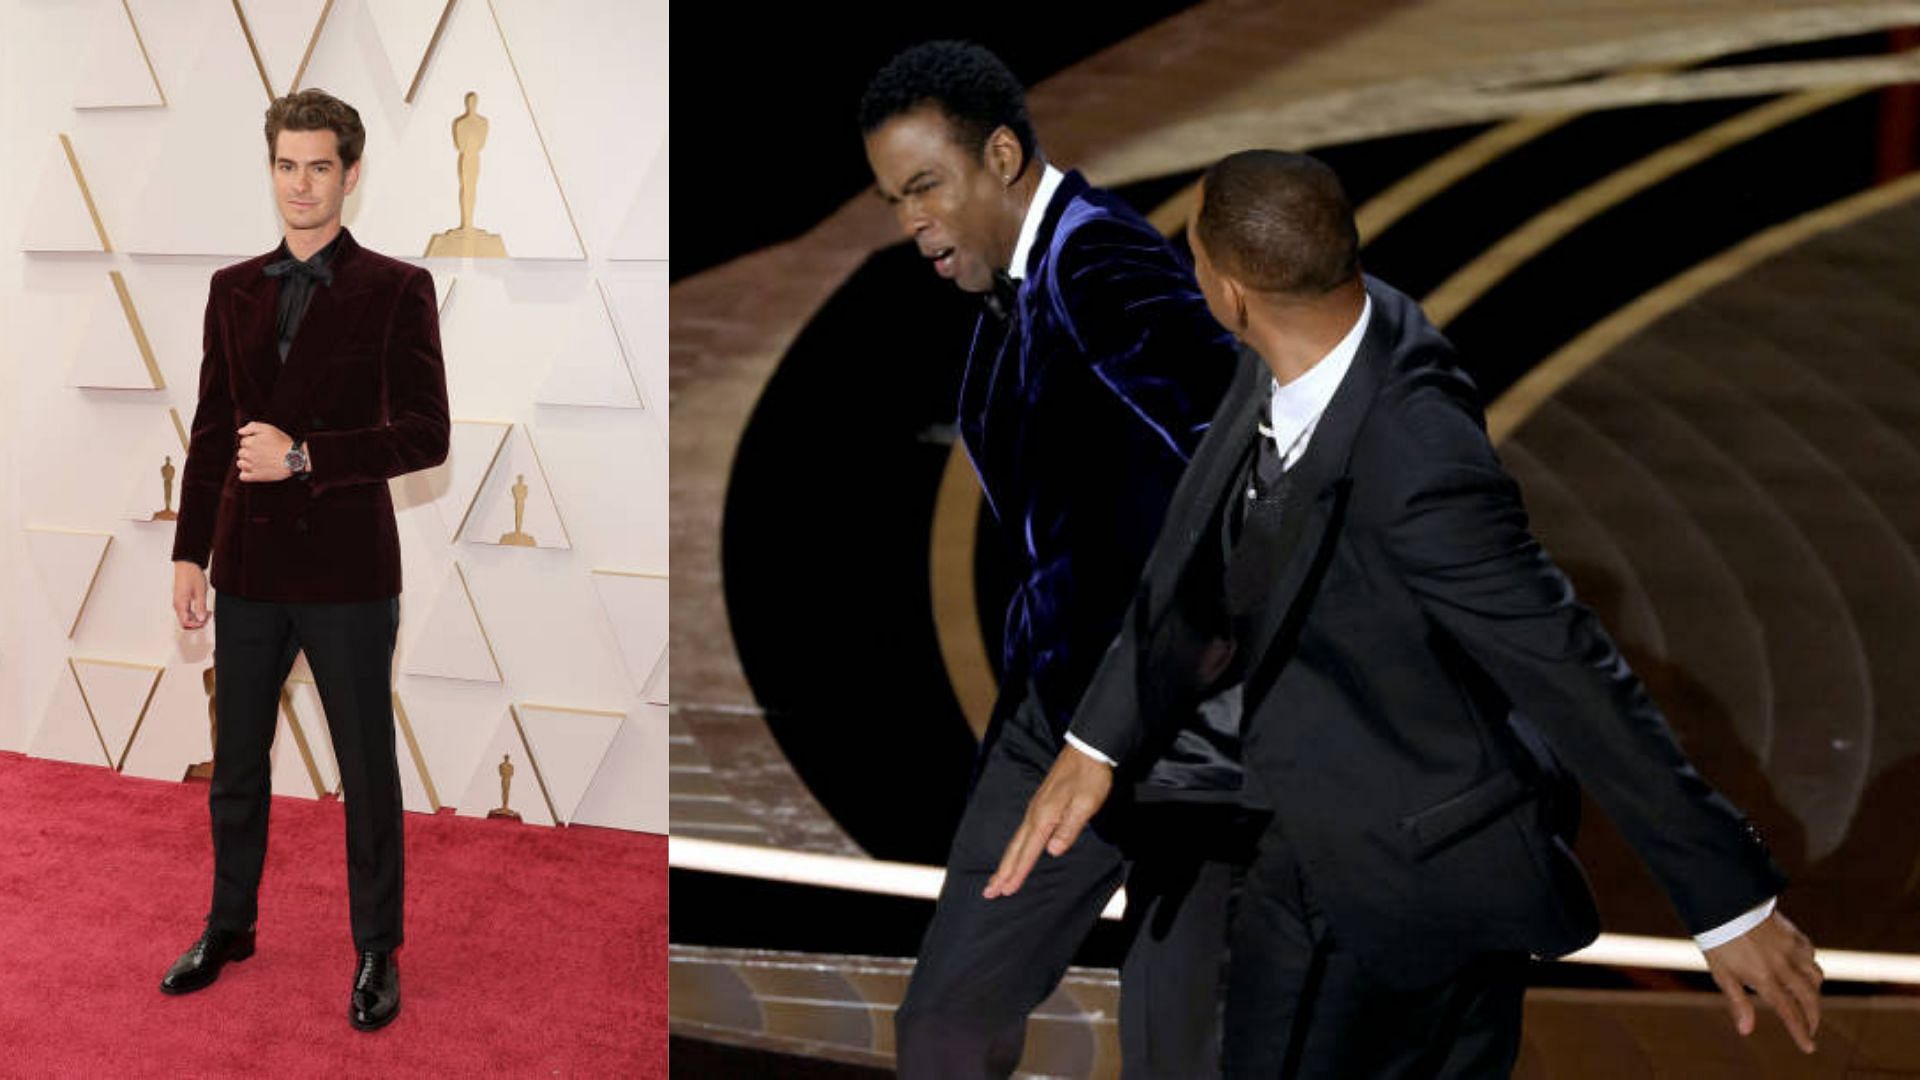 Andrew Garfield, Will Smith, and Chris Rock at the 94th Academy Awards (Image via Getty Images)